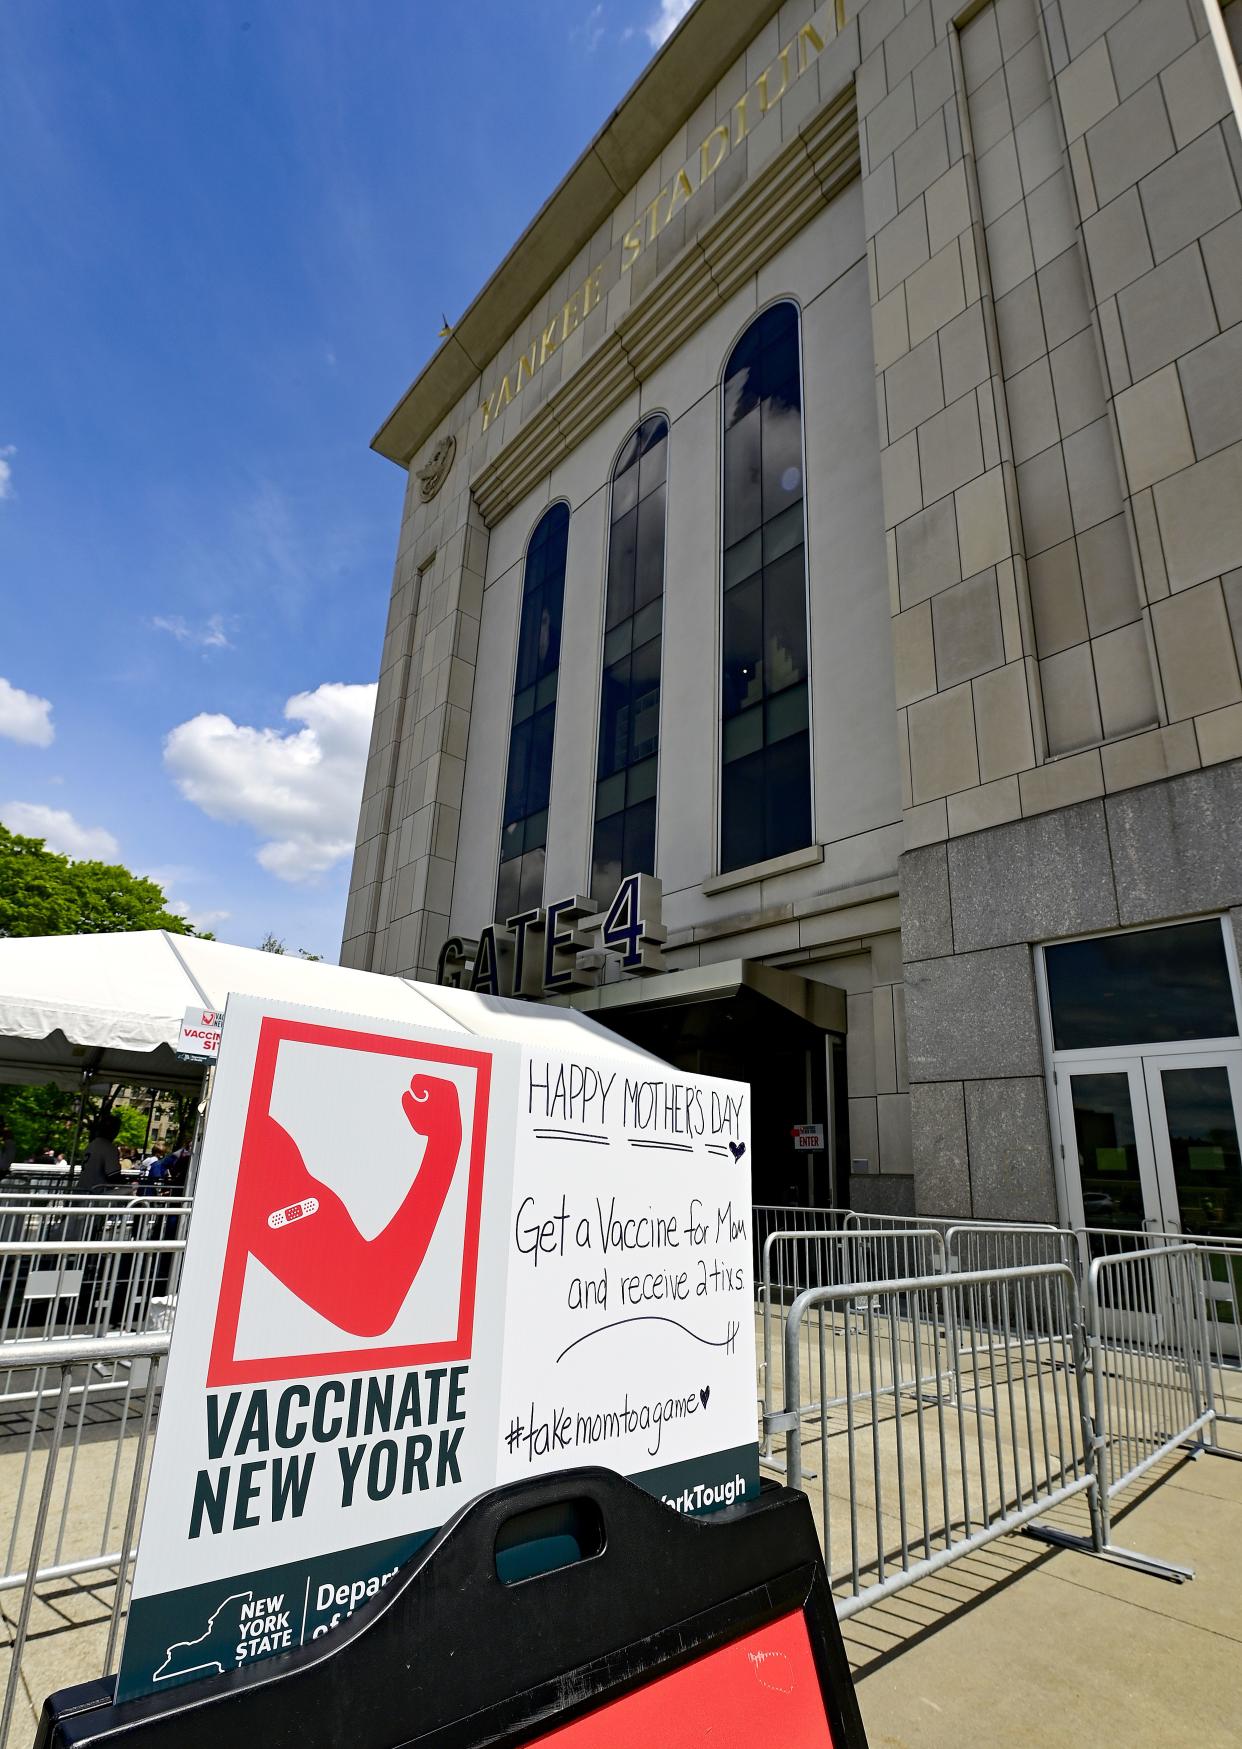 A sign offers fans free tickets to a future game if they get a COVID-19 vaccine offered at the stadium prior to the game between the New York Yankees and the Washington Nationals at Yankee Stadium on May 9, 2021, in the Bronx borough of New York City. New York Governor Andrew Cuomo announced this COVID vaccine initiative on May 5.